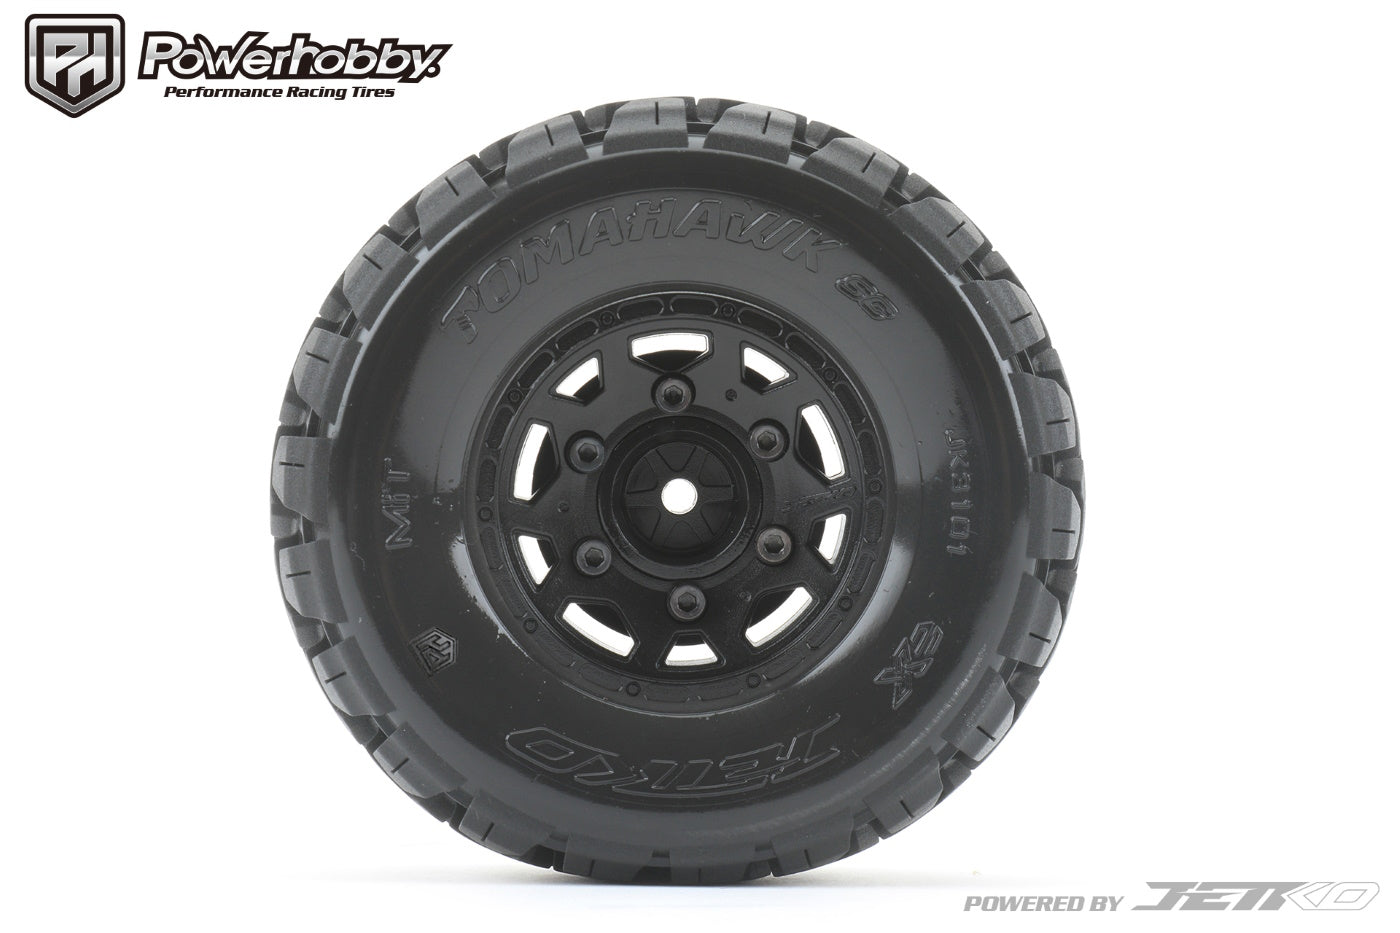 Powerhobby Tomahawk 1/10 SC Belted Tires (2) with Removable Hex Wheels - PowerHobby